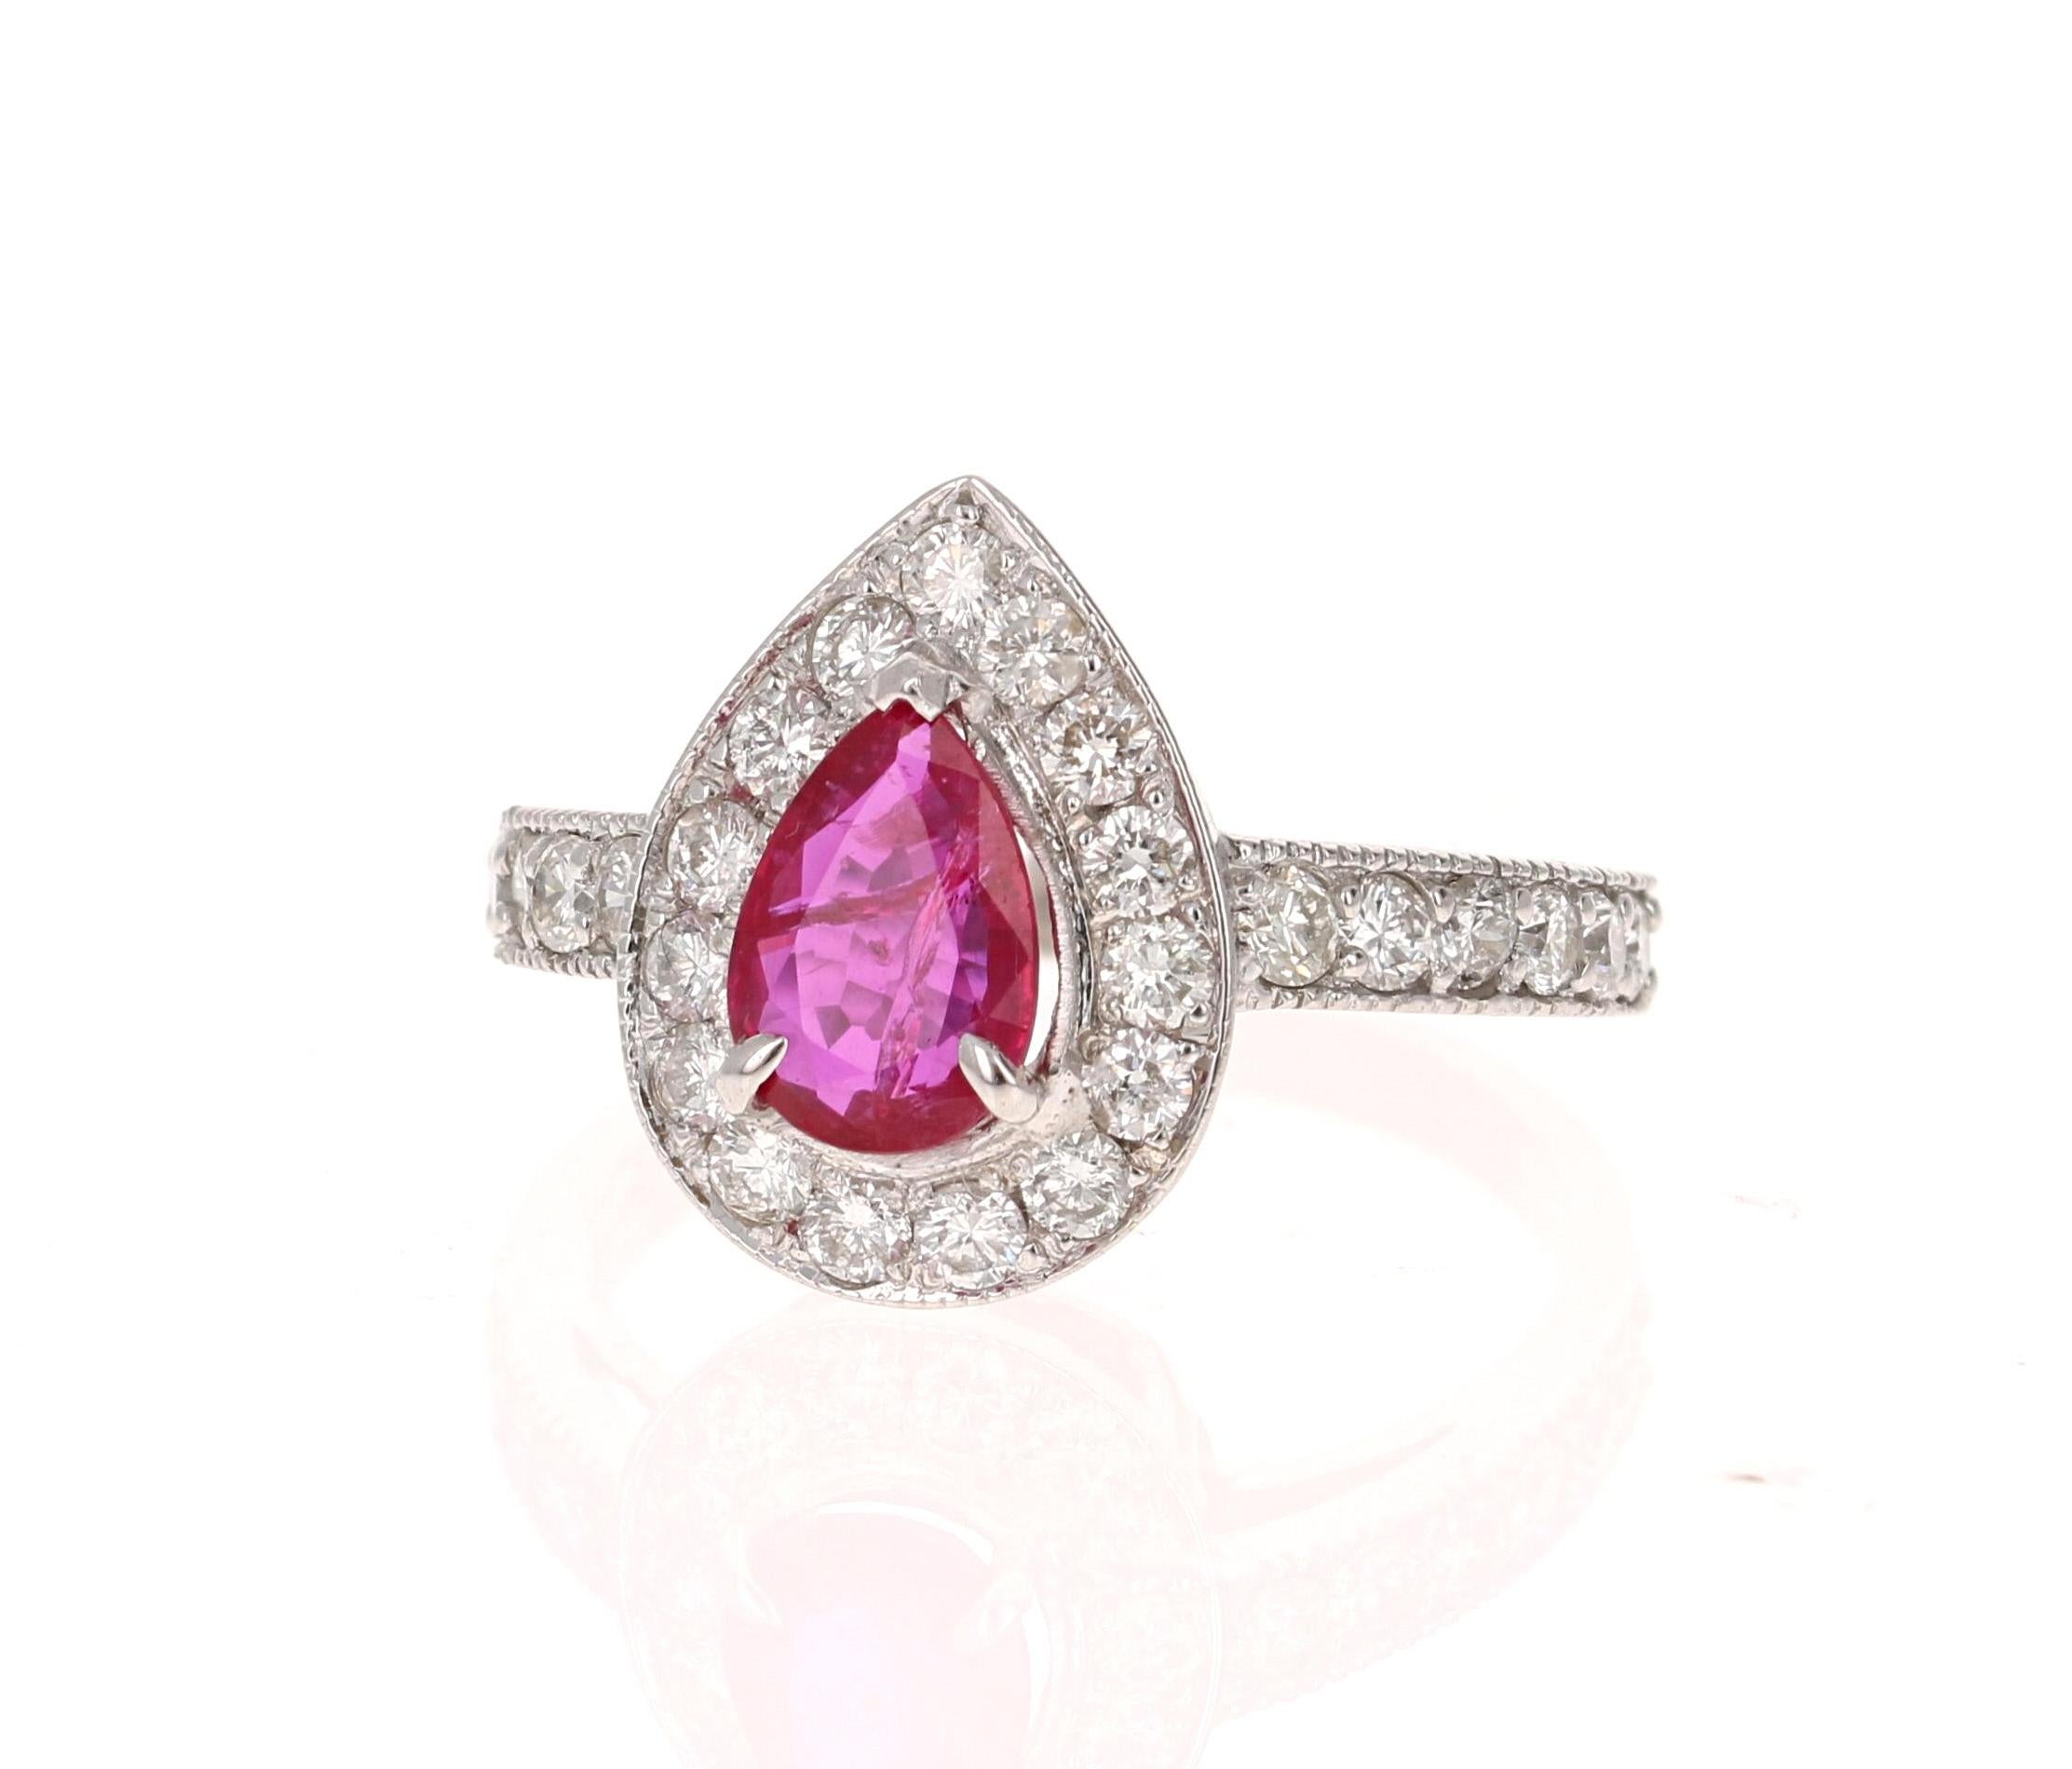 GIA Certified - Natural, Unheated Ruby and Diamond Ring in 18 Karat White Gold
This ring has a gorgeous Pear Cut Ruby set in the center of the ring.  The Ruby has origins from Southern Africa (Republic of Mozambique) and is 1.10 carats. It has a